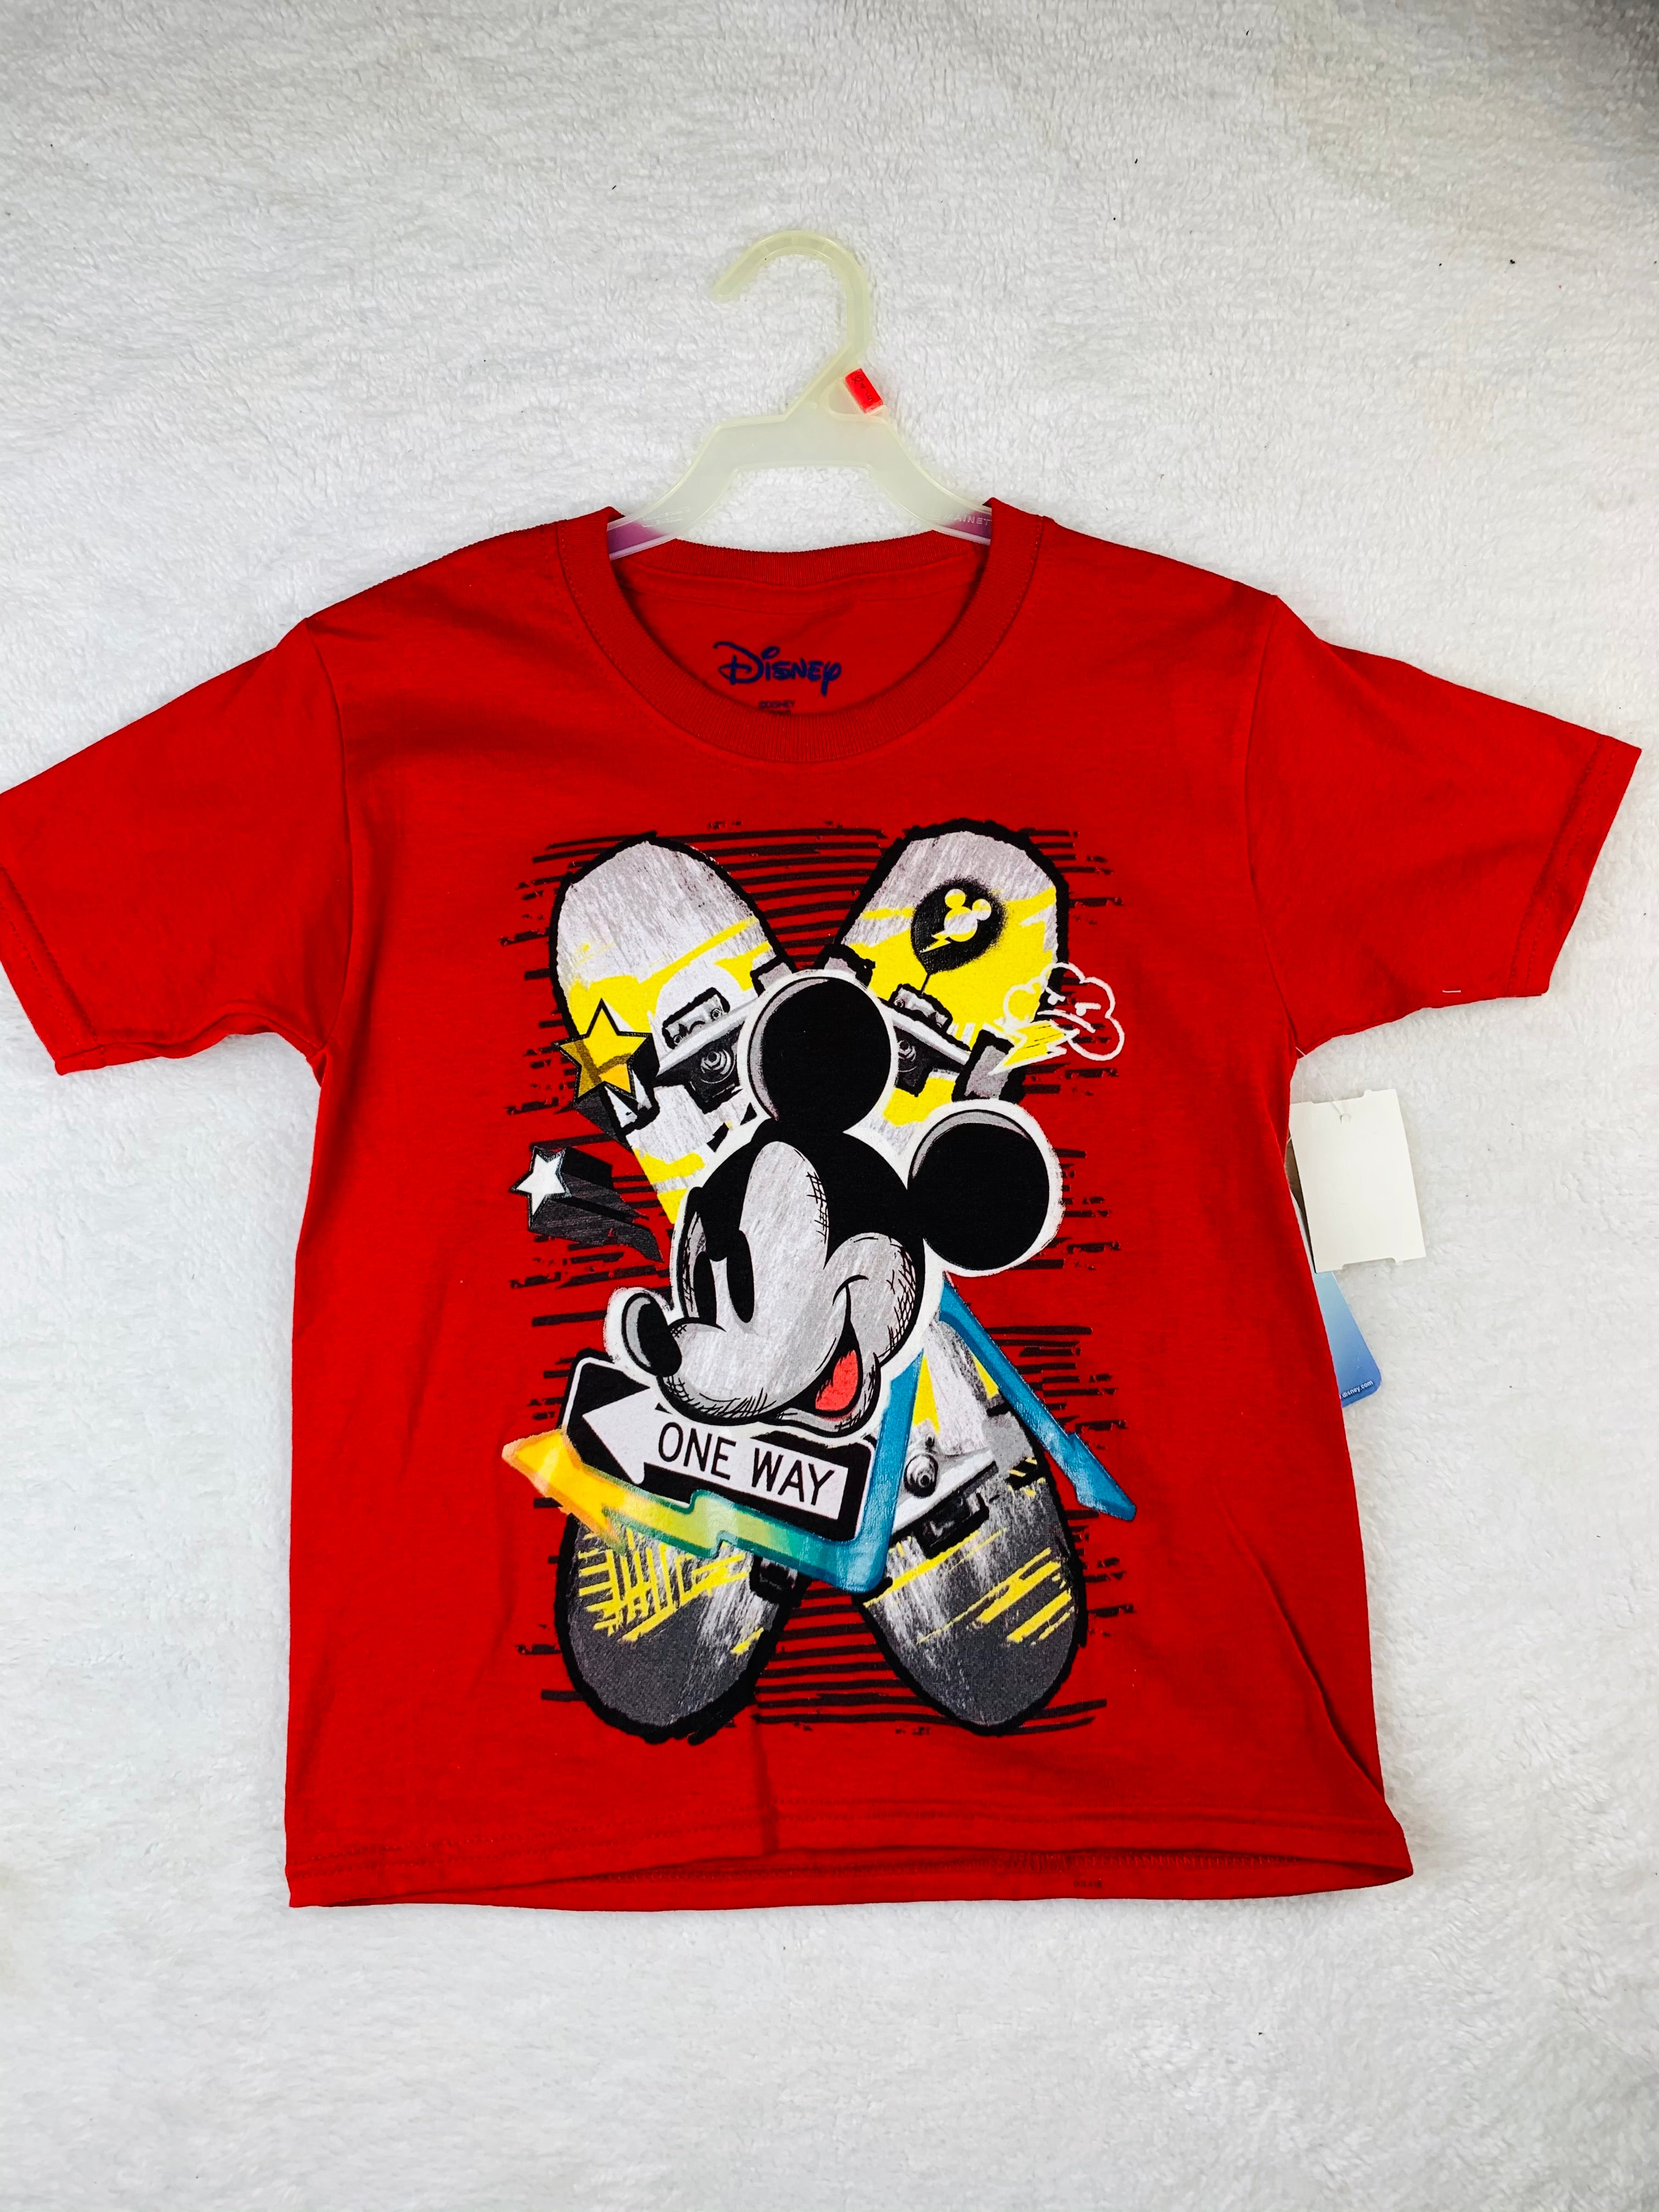 Mickey Mouse skater shirt